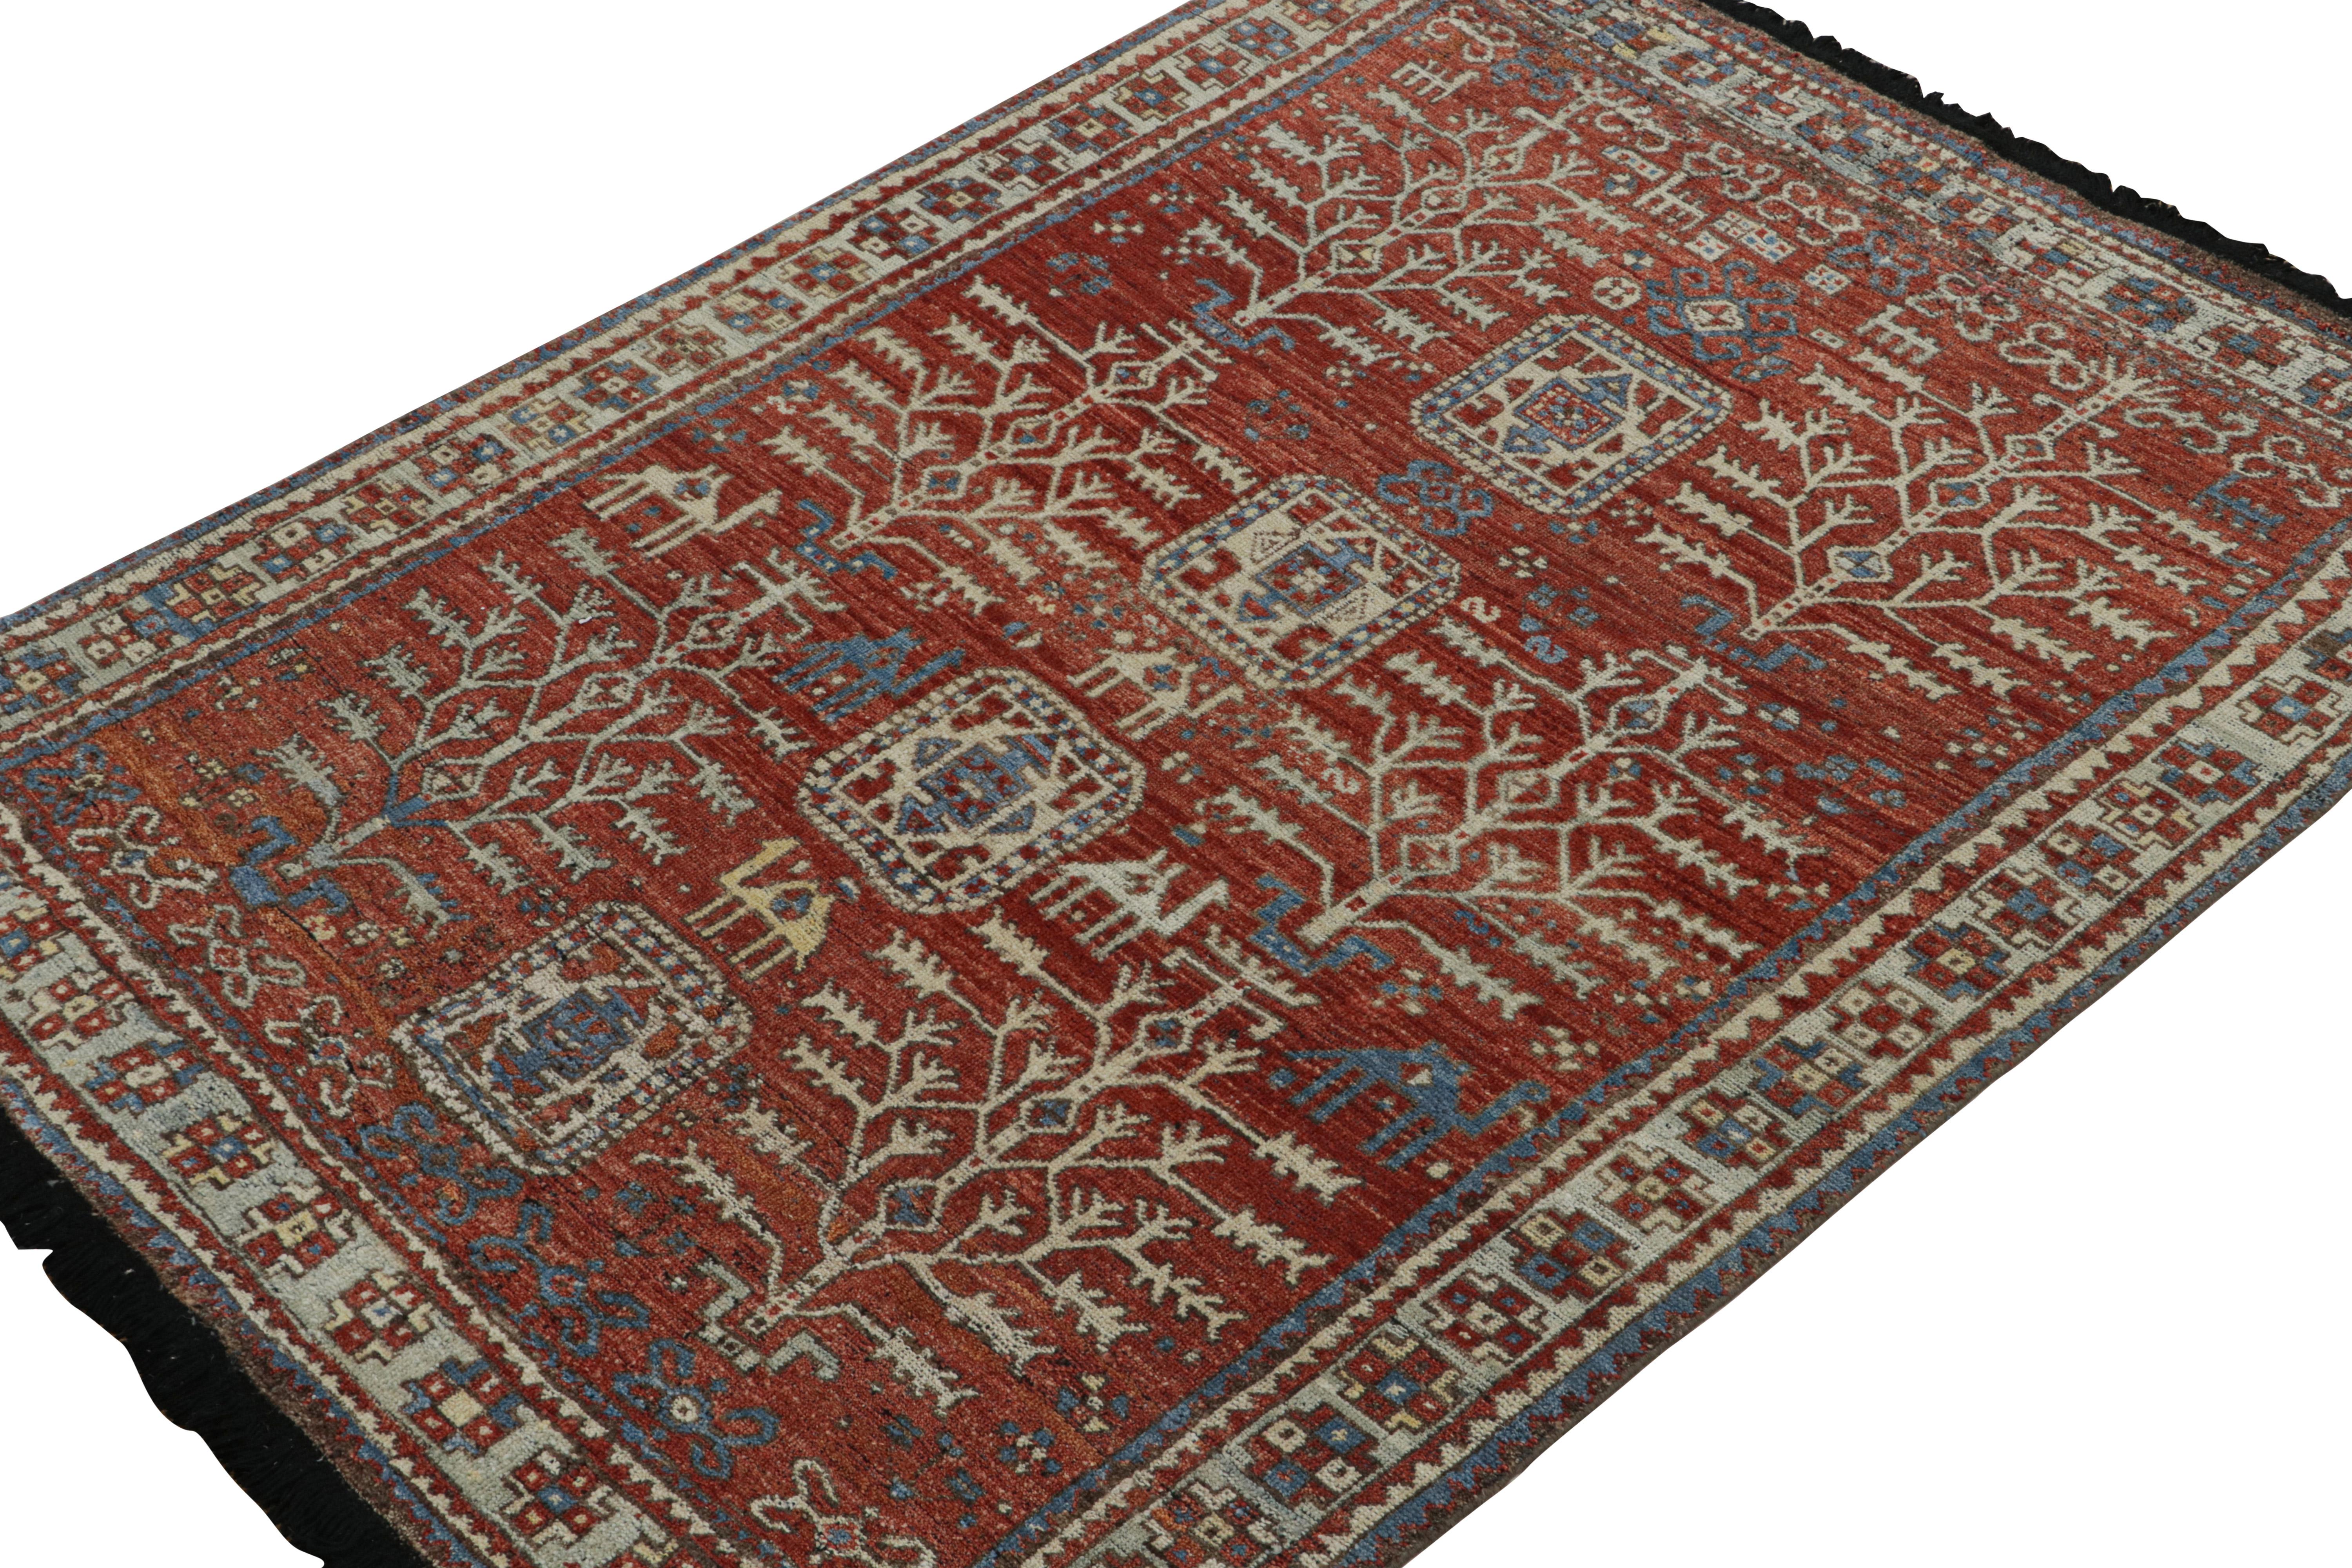 This 5x7 rug is a grand new entry to Rug & Kilim’s classics Burano collection. Hand-knotted in wool.

Further on the Design: 

Inspired by antique tribal rugs, this pictorial rug features camel depictions accompanying geometric patterns in red,